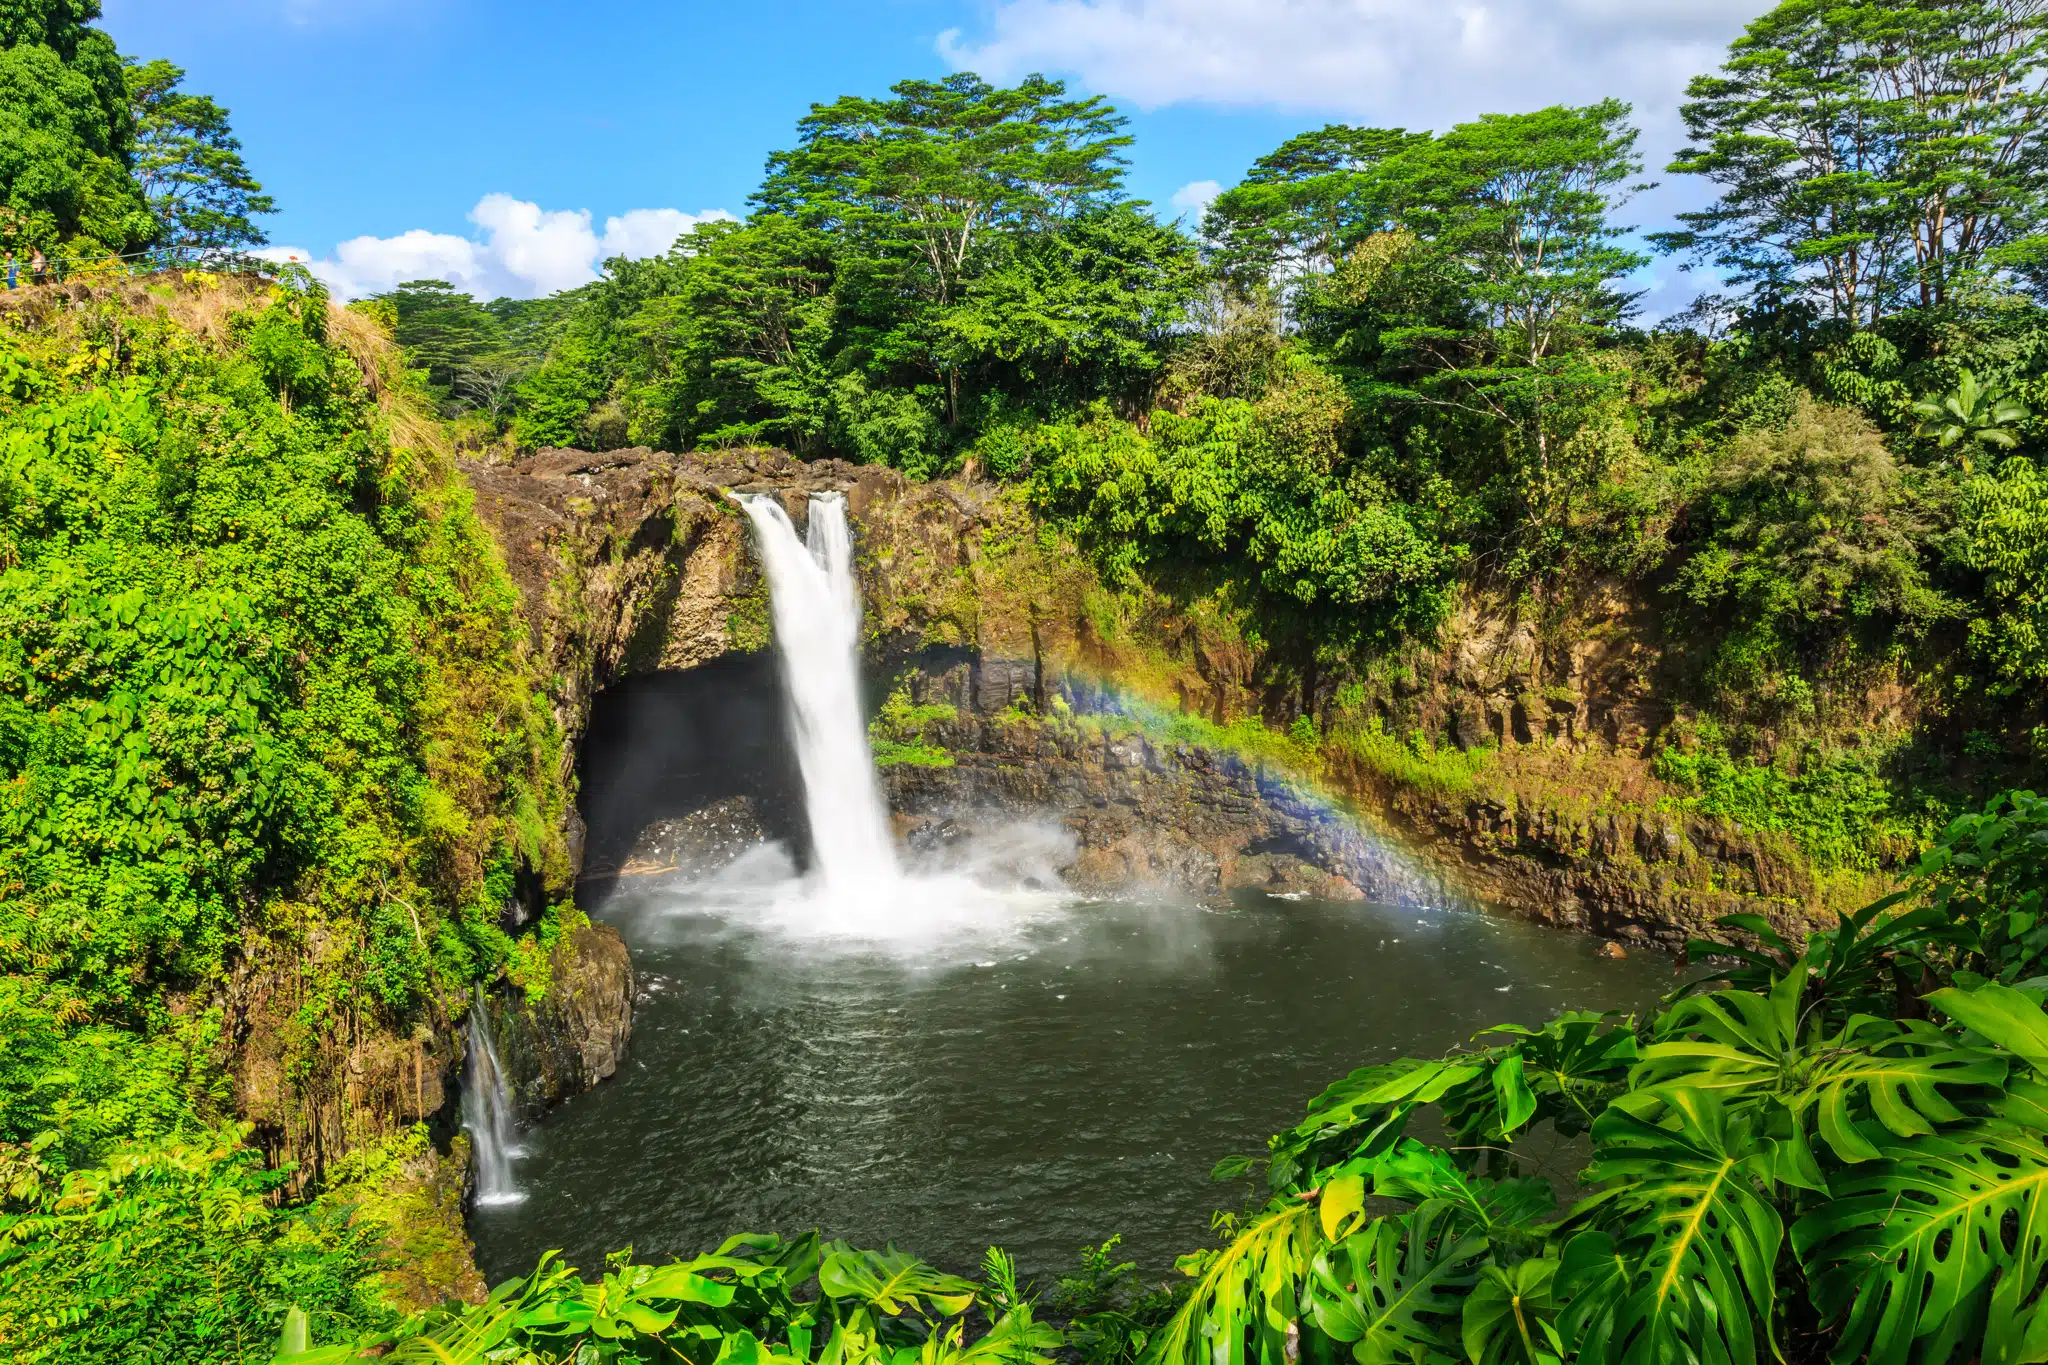 Rainbow Falls is a Waterfall located in the city of Hilo on Big Island, Hawaii